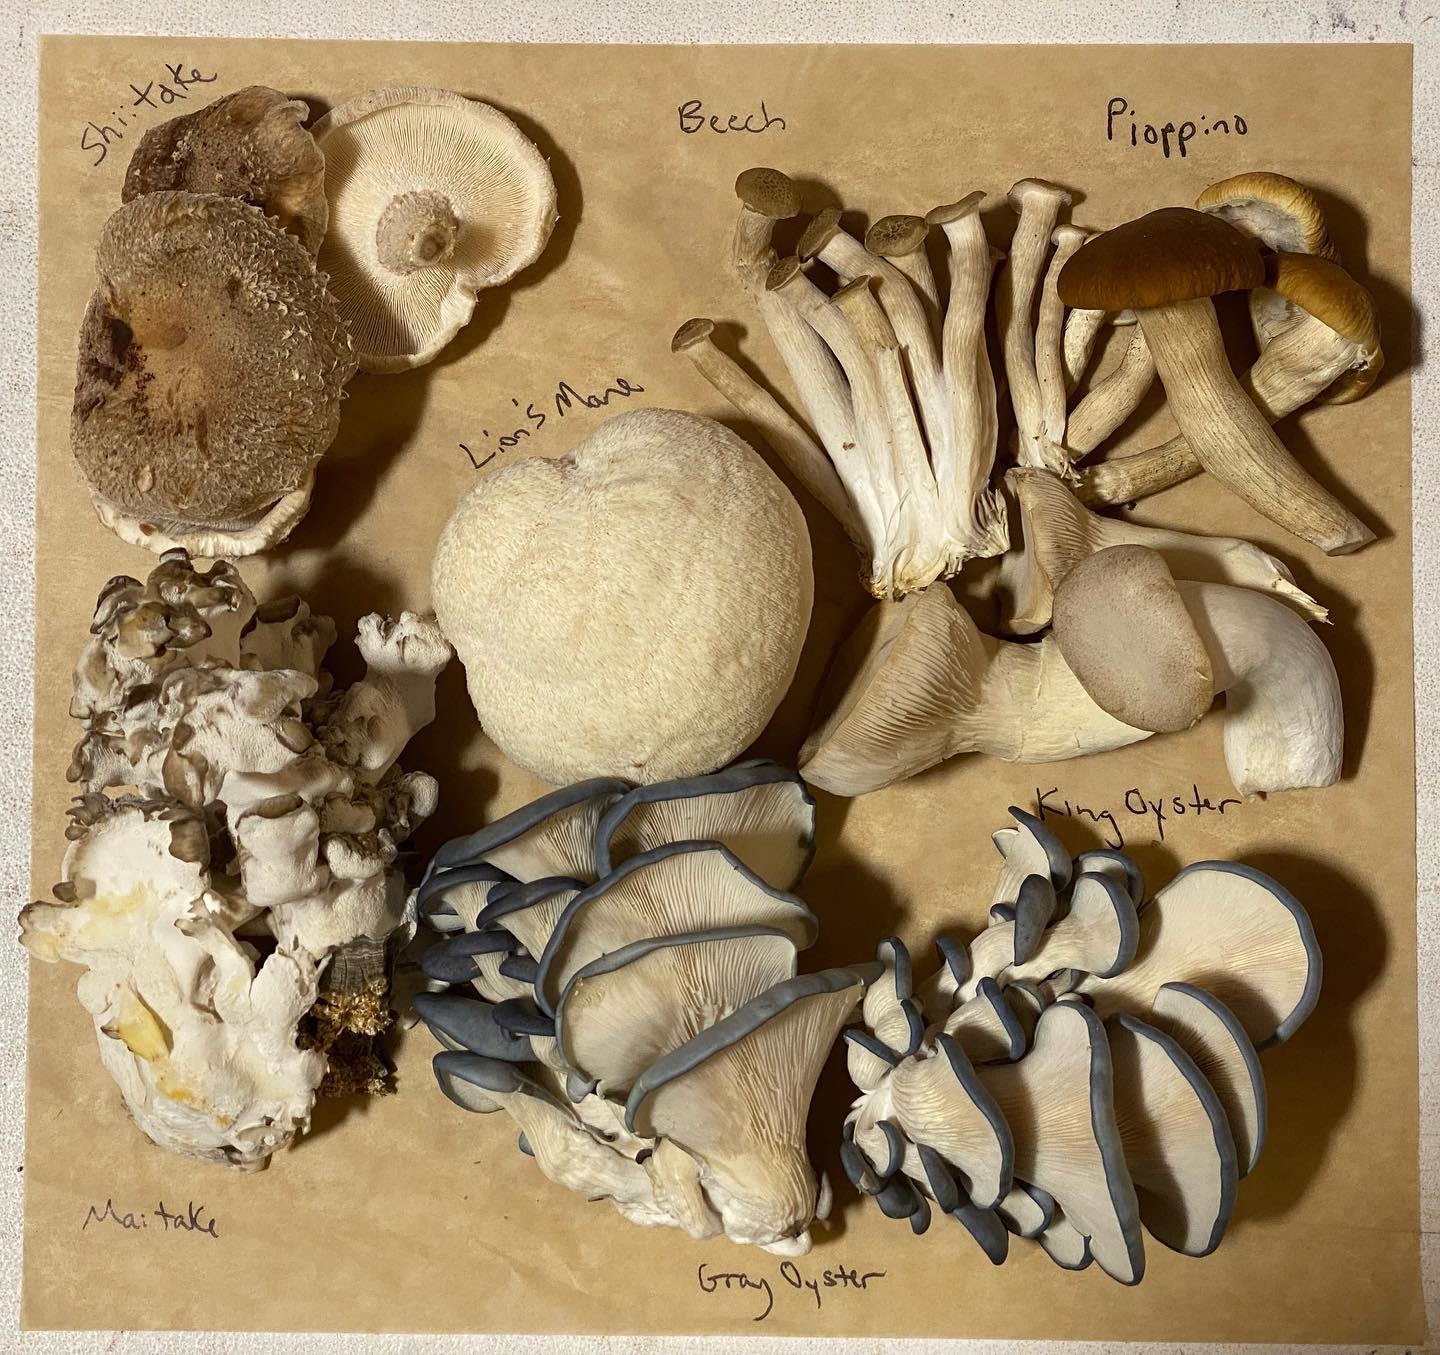 For those curious what mushrooms I grow year round , here’s a small sample of each, with its name written just above or below:
Gray Oyster
King Oyster
Lion’s Mane
Beech
Pioppino (only grown occasionally)
Beech
Shiitake 
Maitake